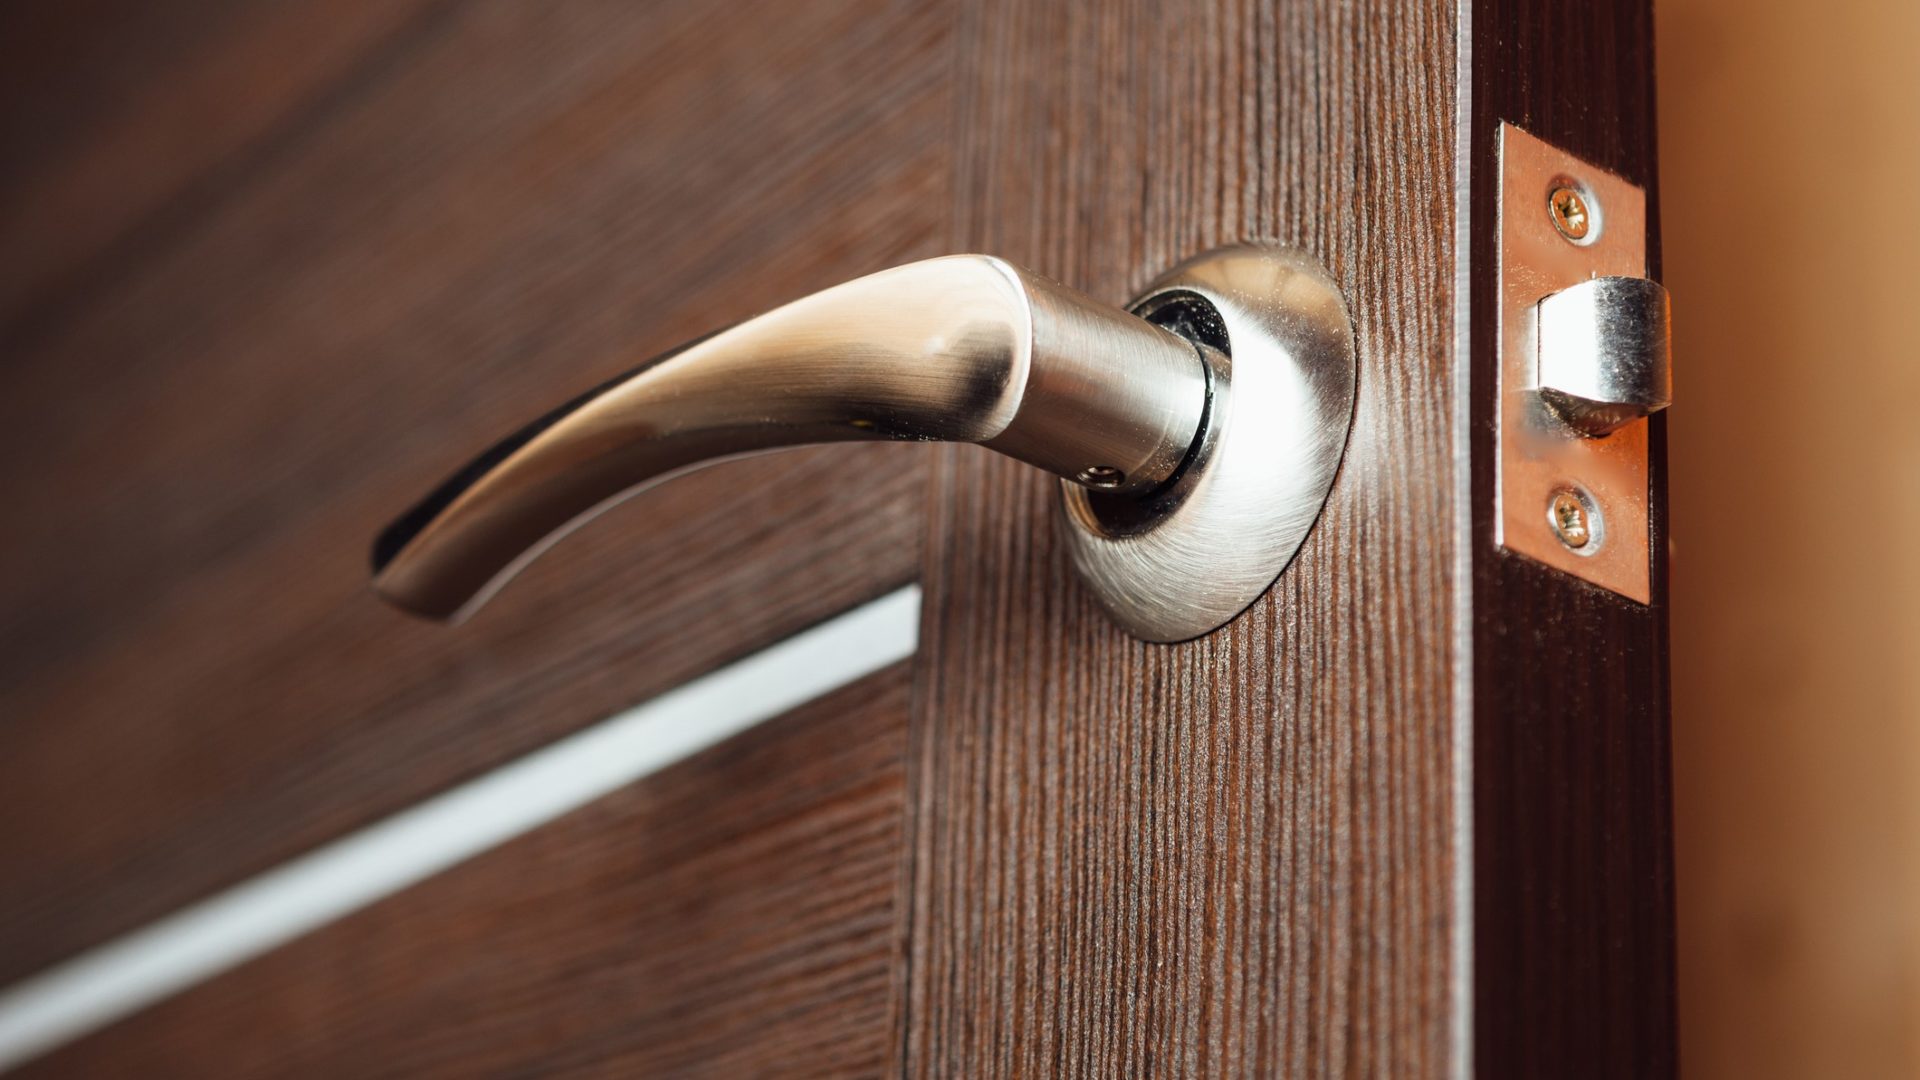 Architectural ironmongery (image: Dreamstime)